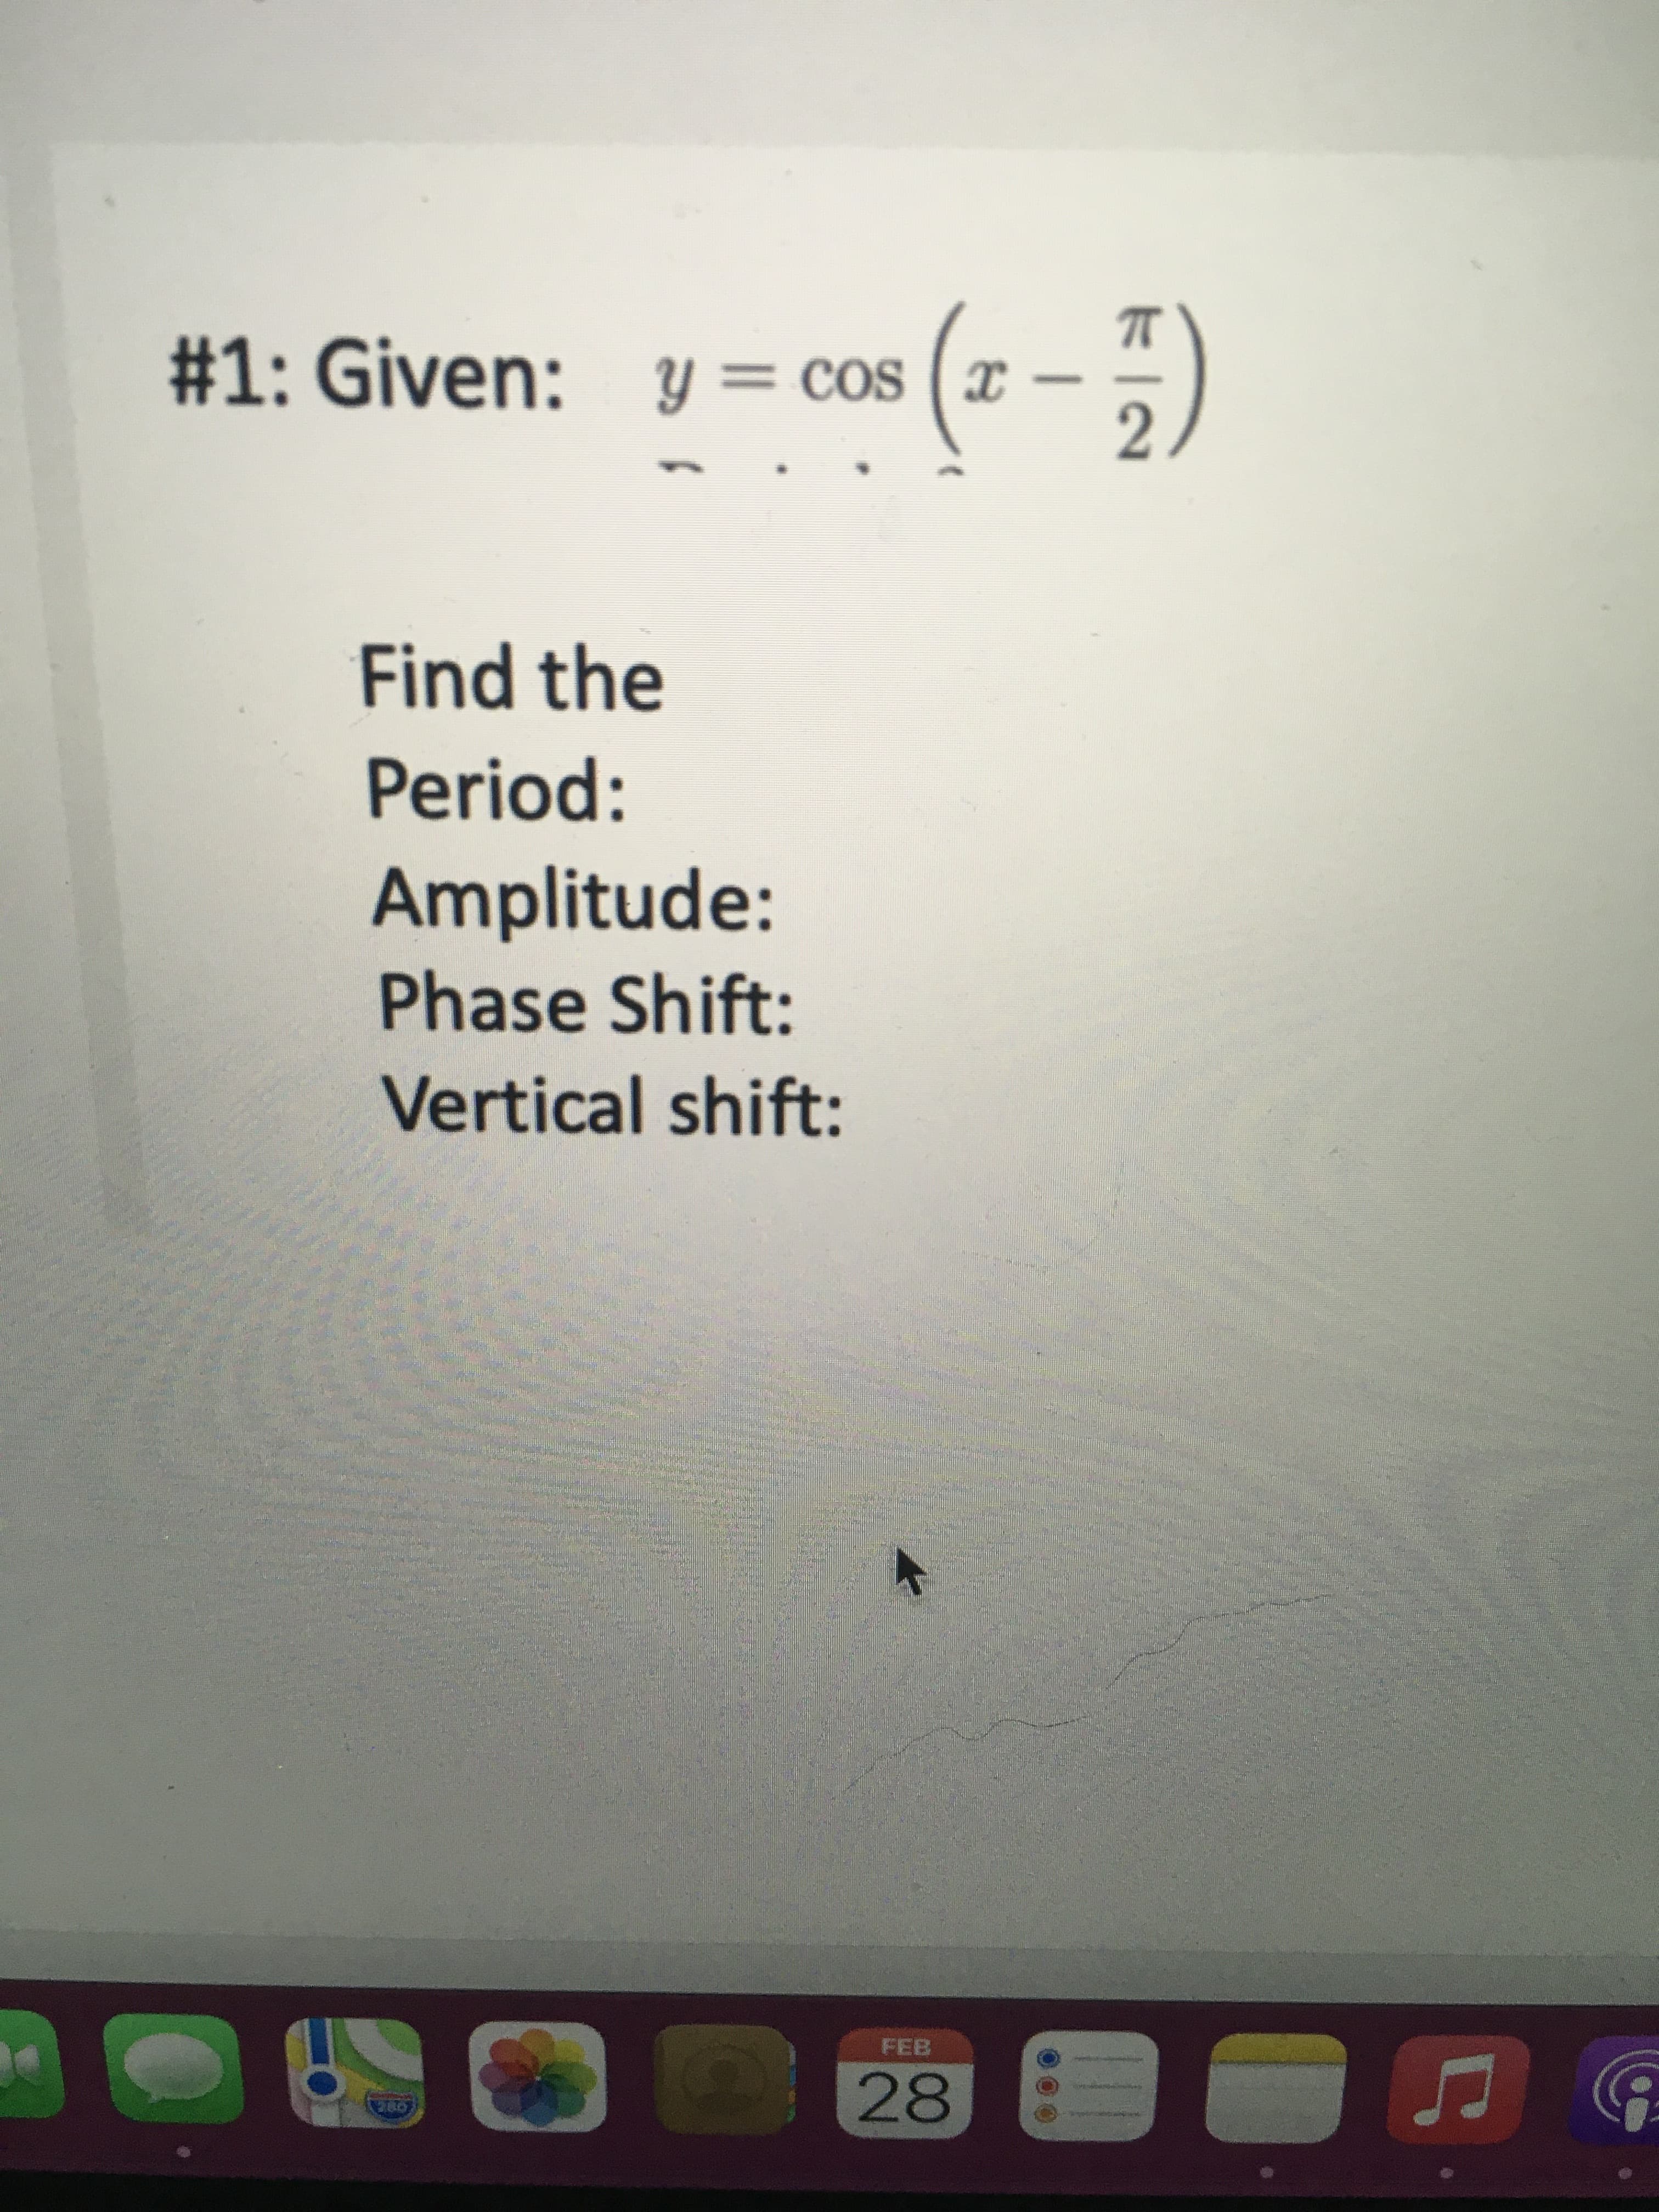 00
#1: Given: Y
y = cos
CoS (x
Find the
Period:
Amplitude:
Phase Shift:
Vertical shift:
FEB
28
